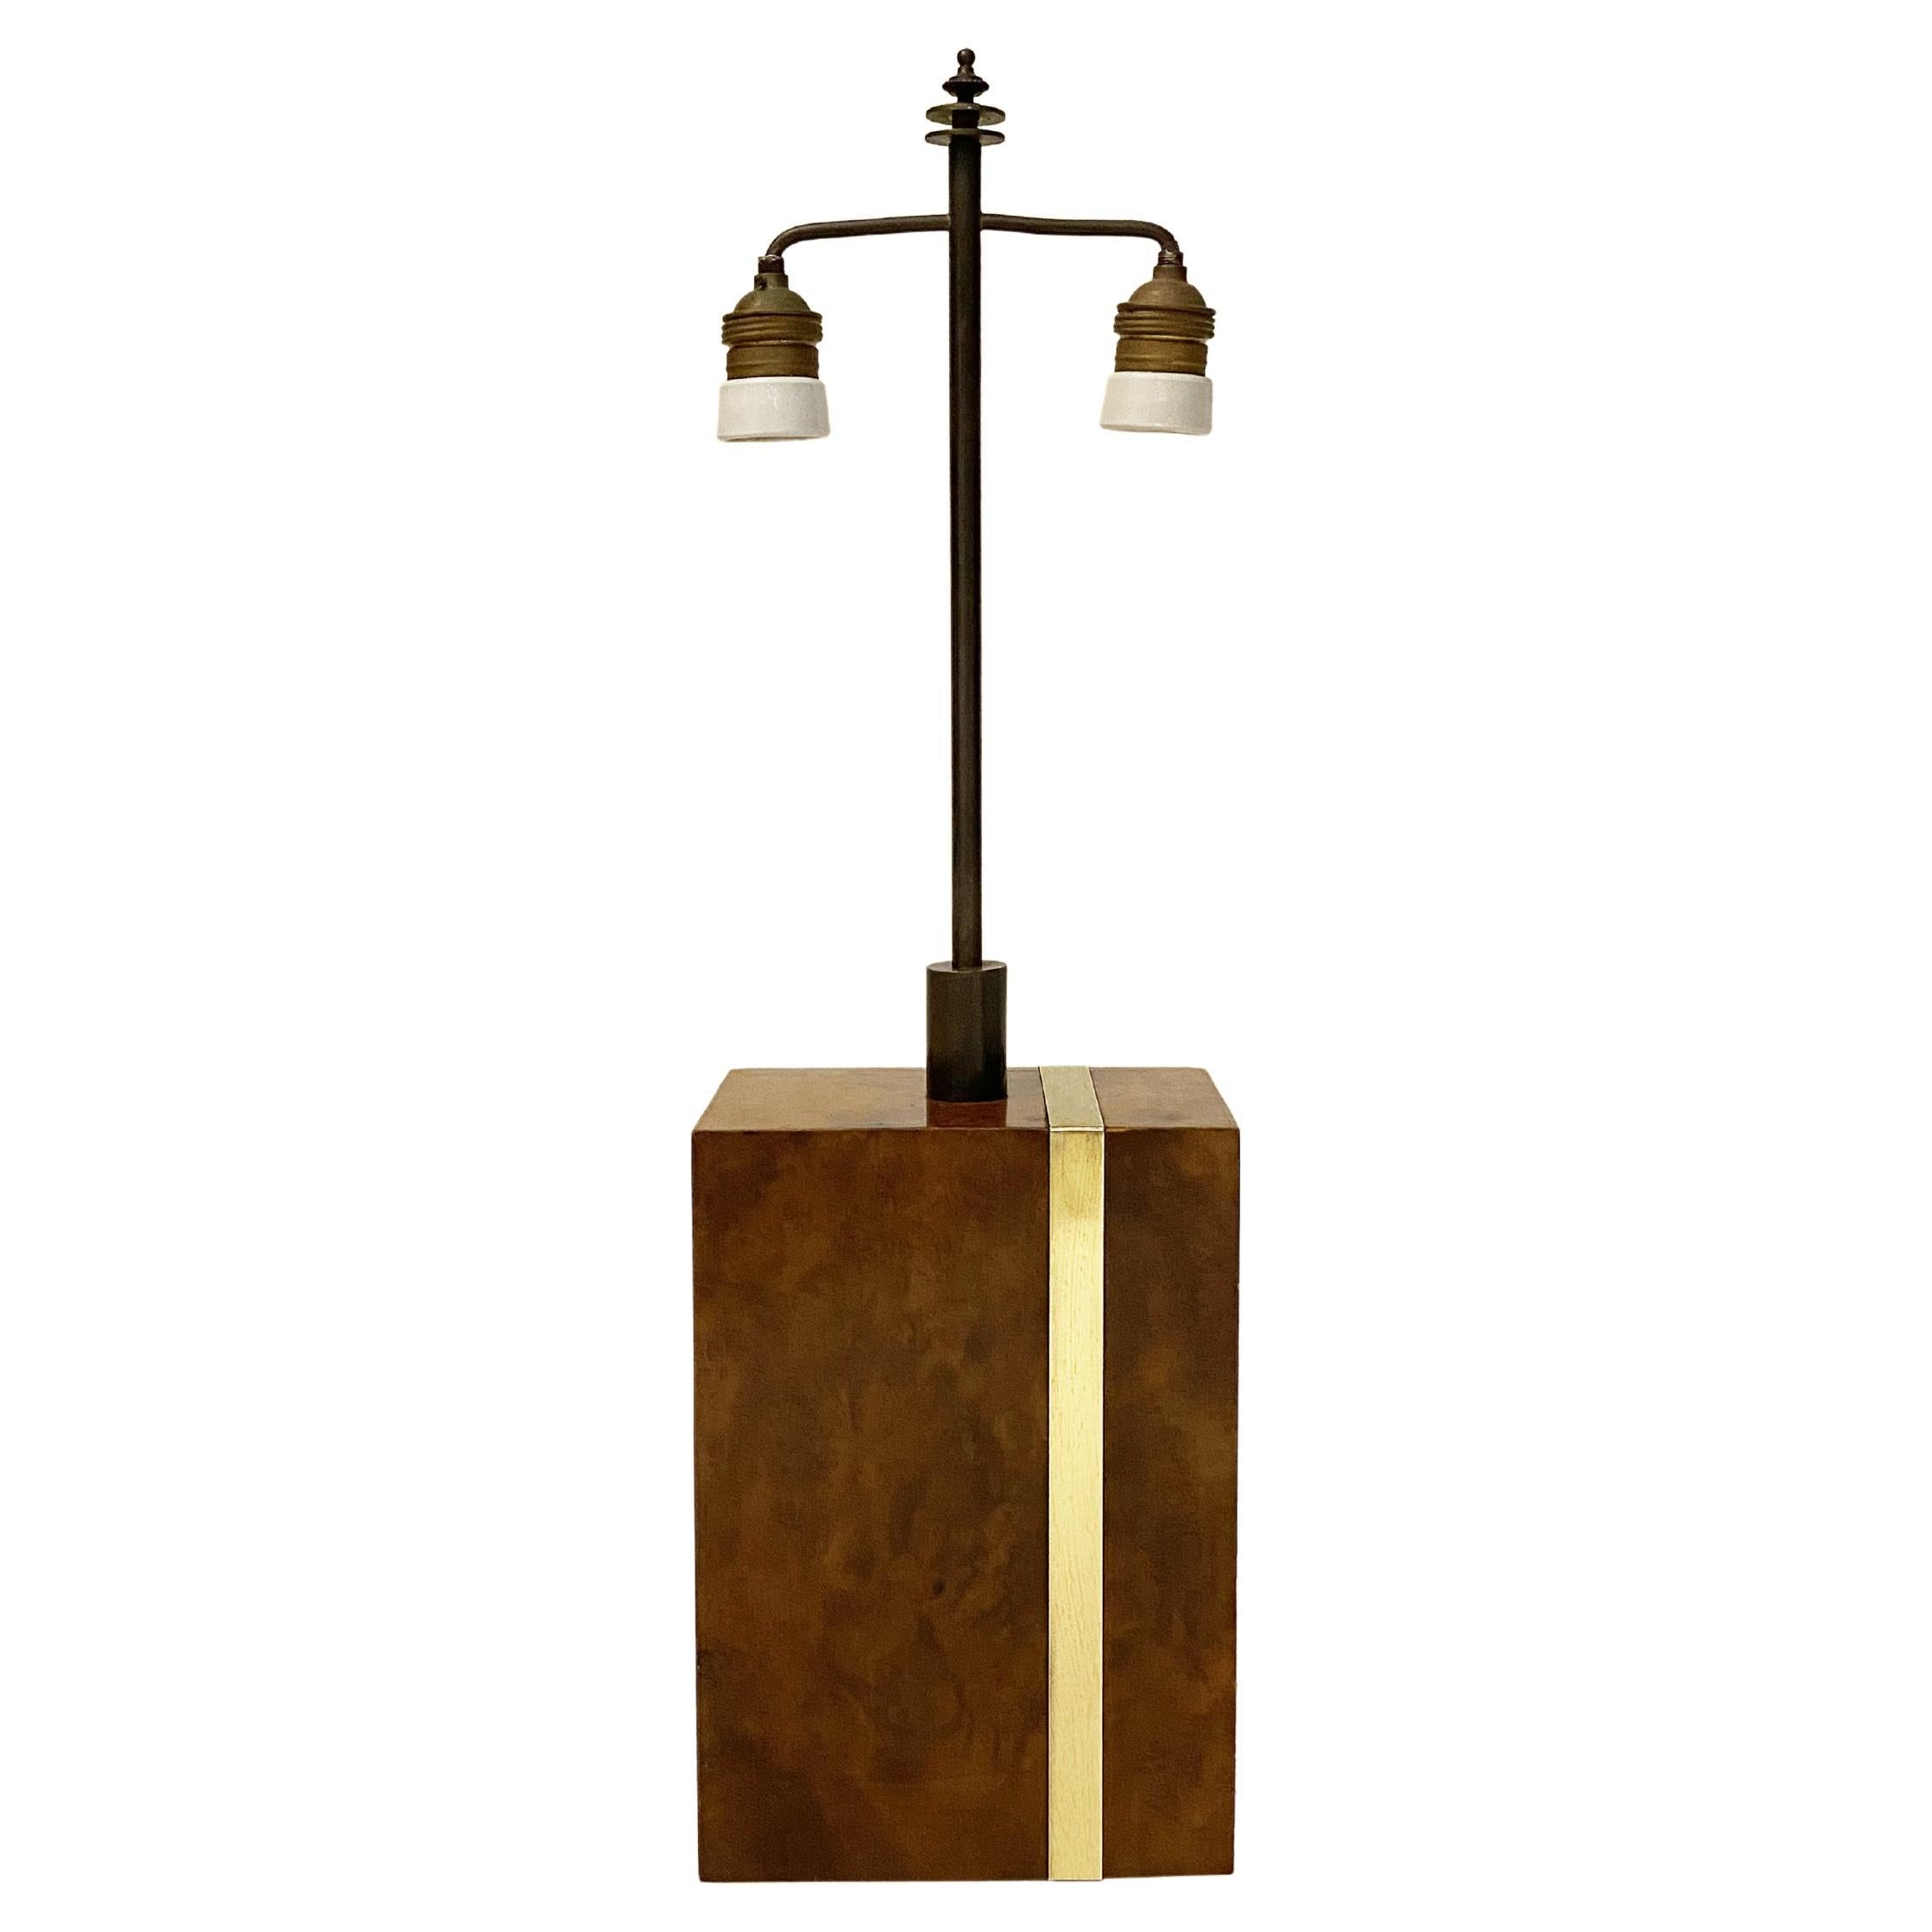 Modernist Lamp in Thuya Burl Wood and Brass, in the Style of Willy Rizzo, 1970s